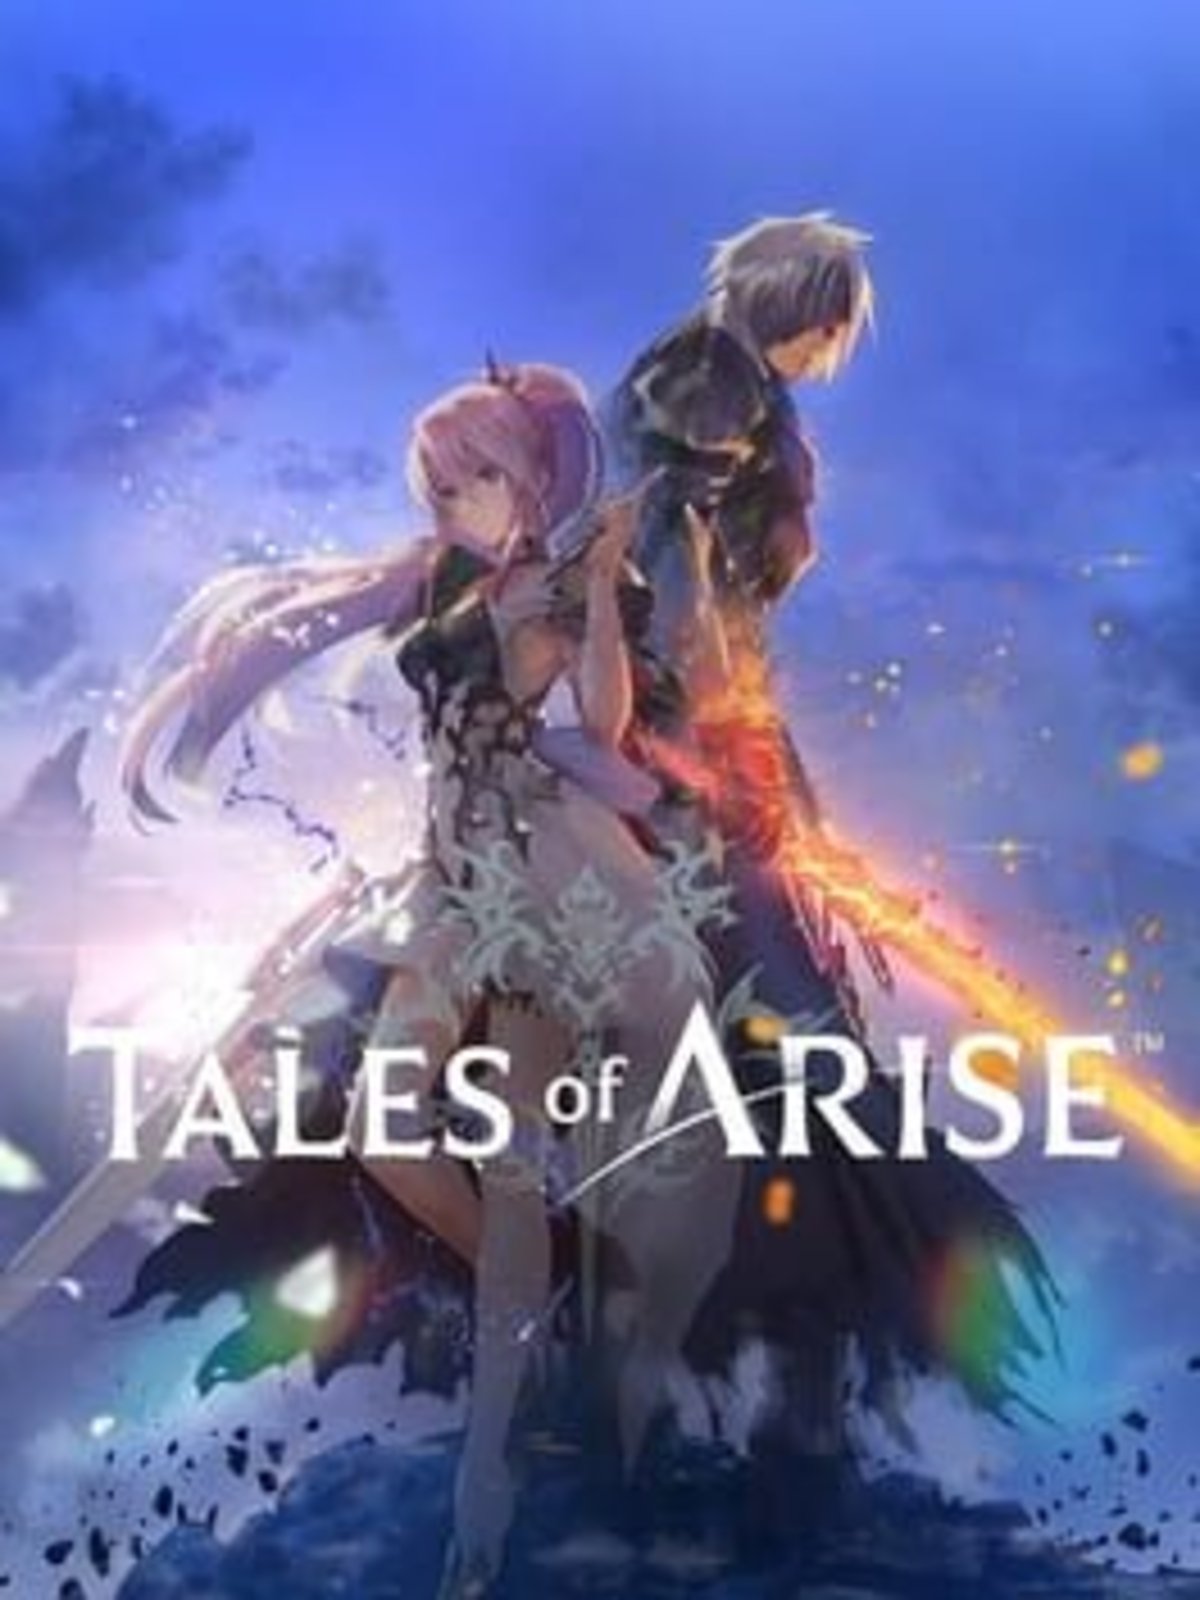 Tales of Arise development team responds to the ability to see the game on Nintendo Switch